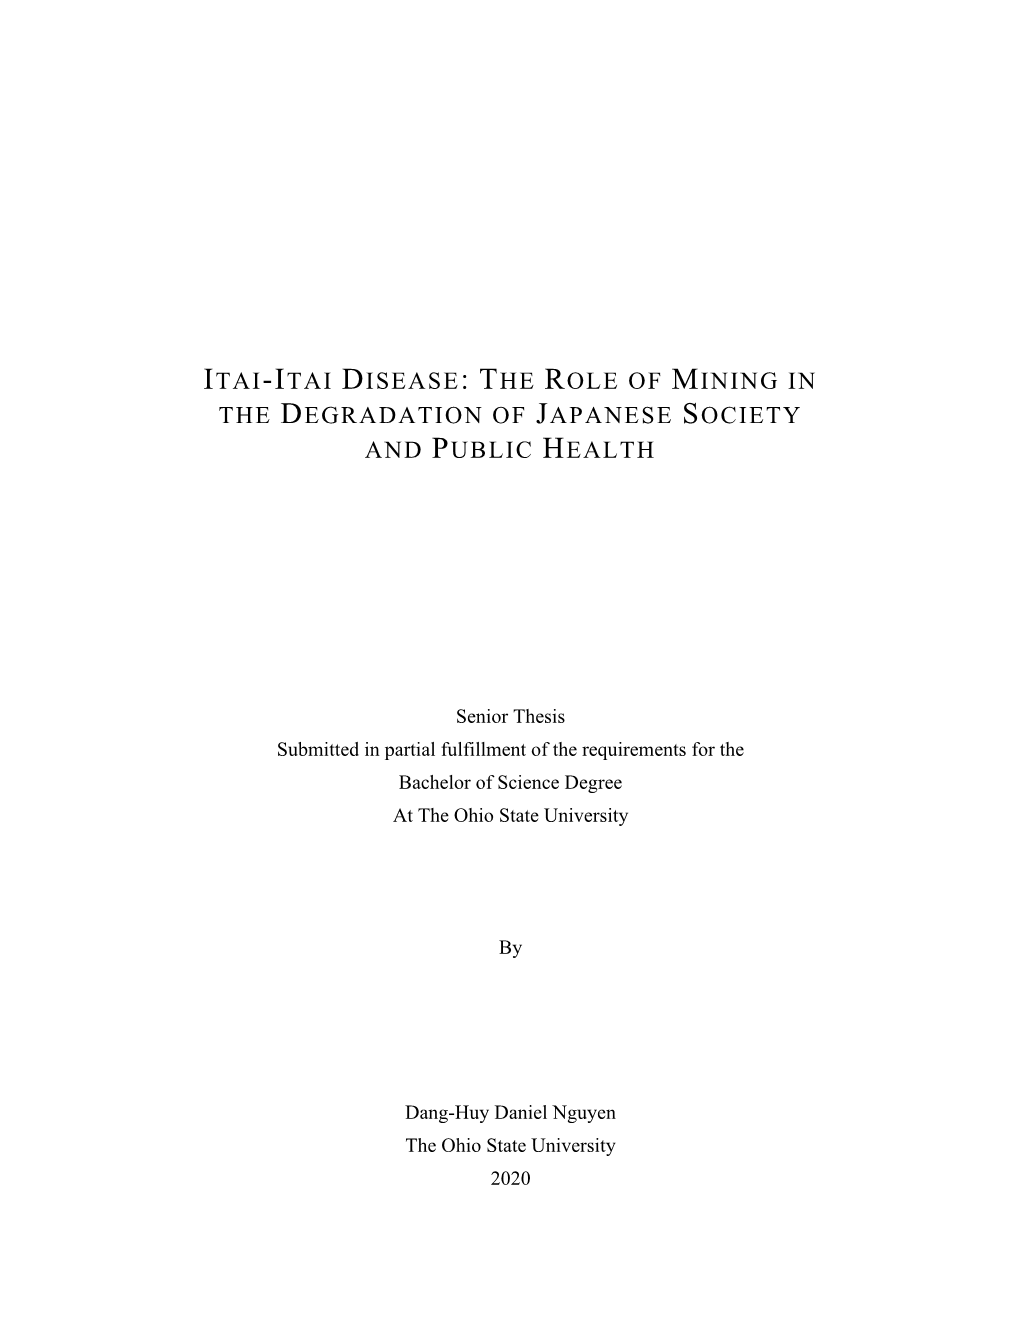 Itai-Itai Disease: the Role of Mining in the Degradation of Japanese Society and Public Health